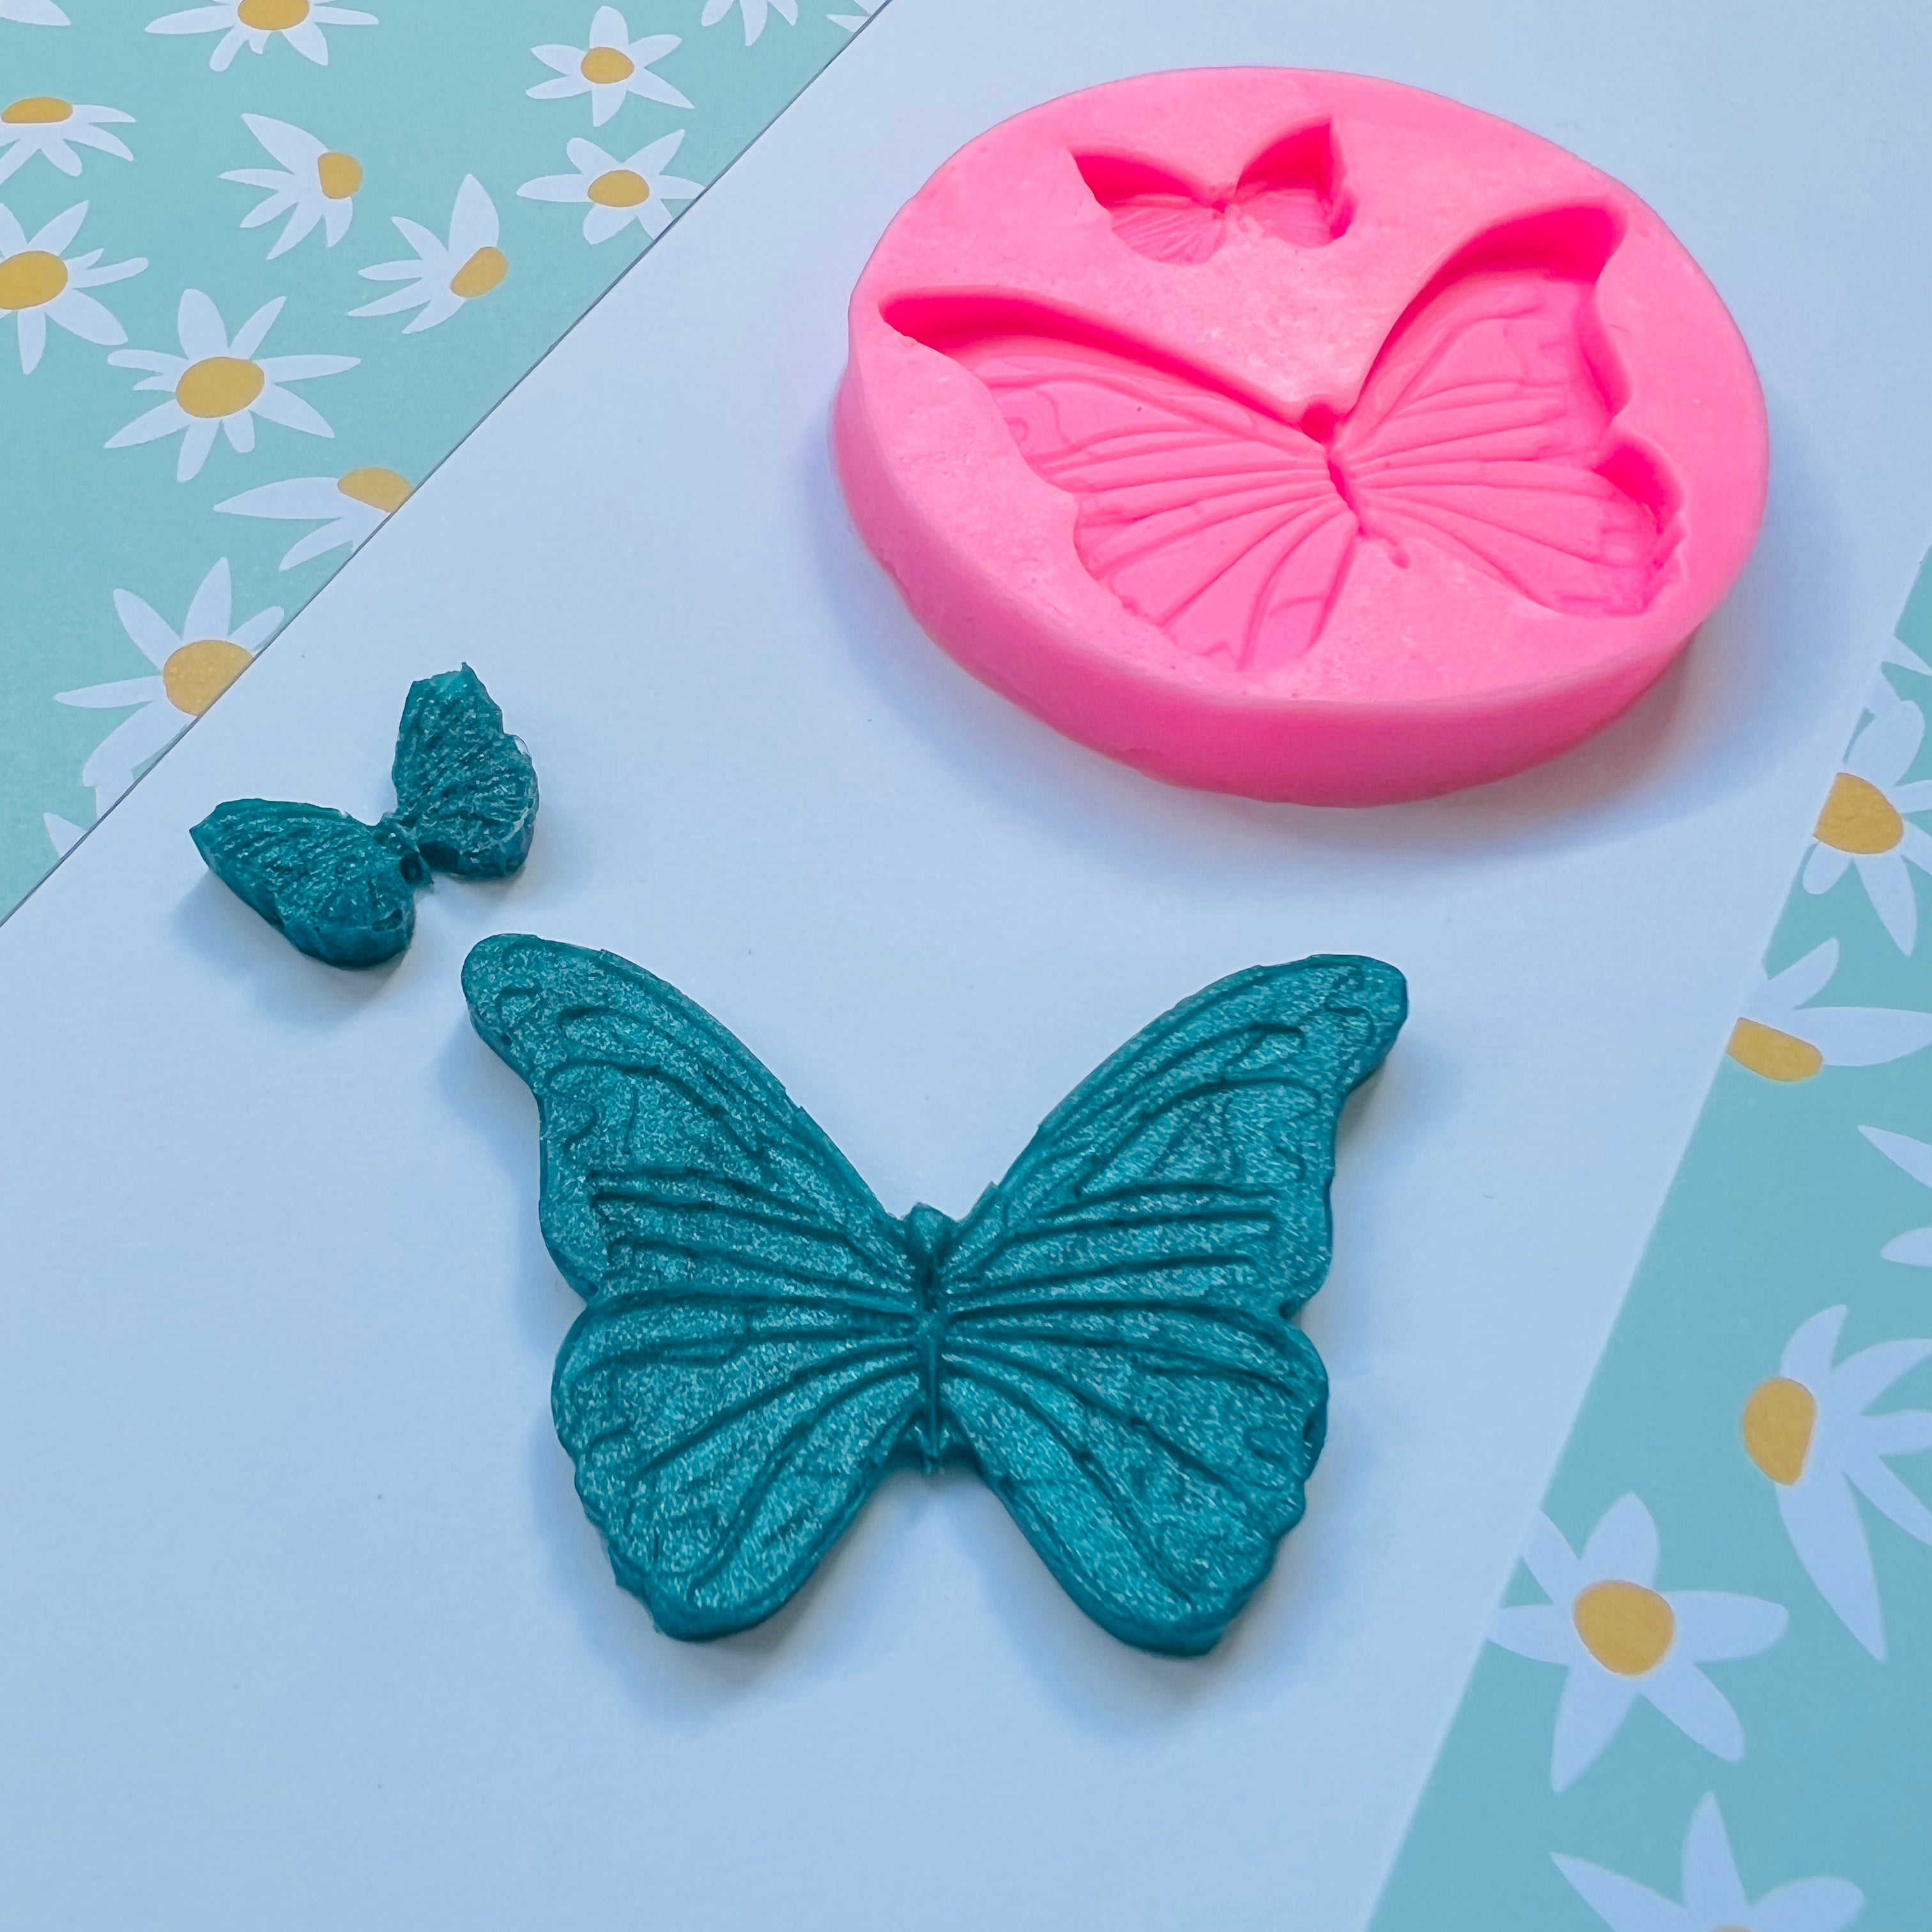 Mold-it Lux Single Butterfly Silicone Mold